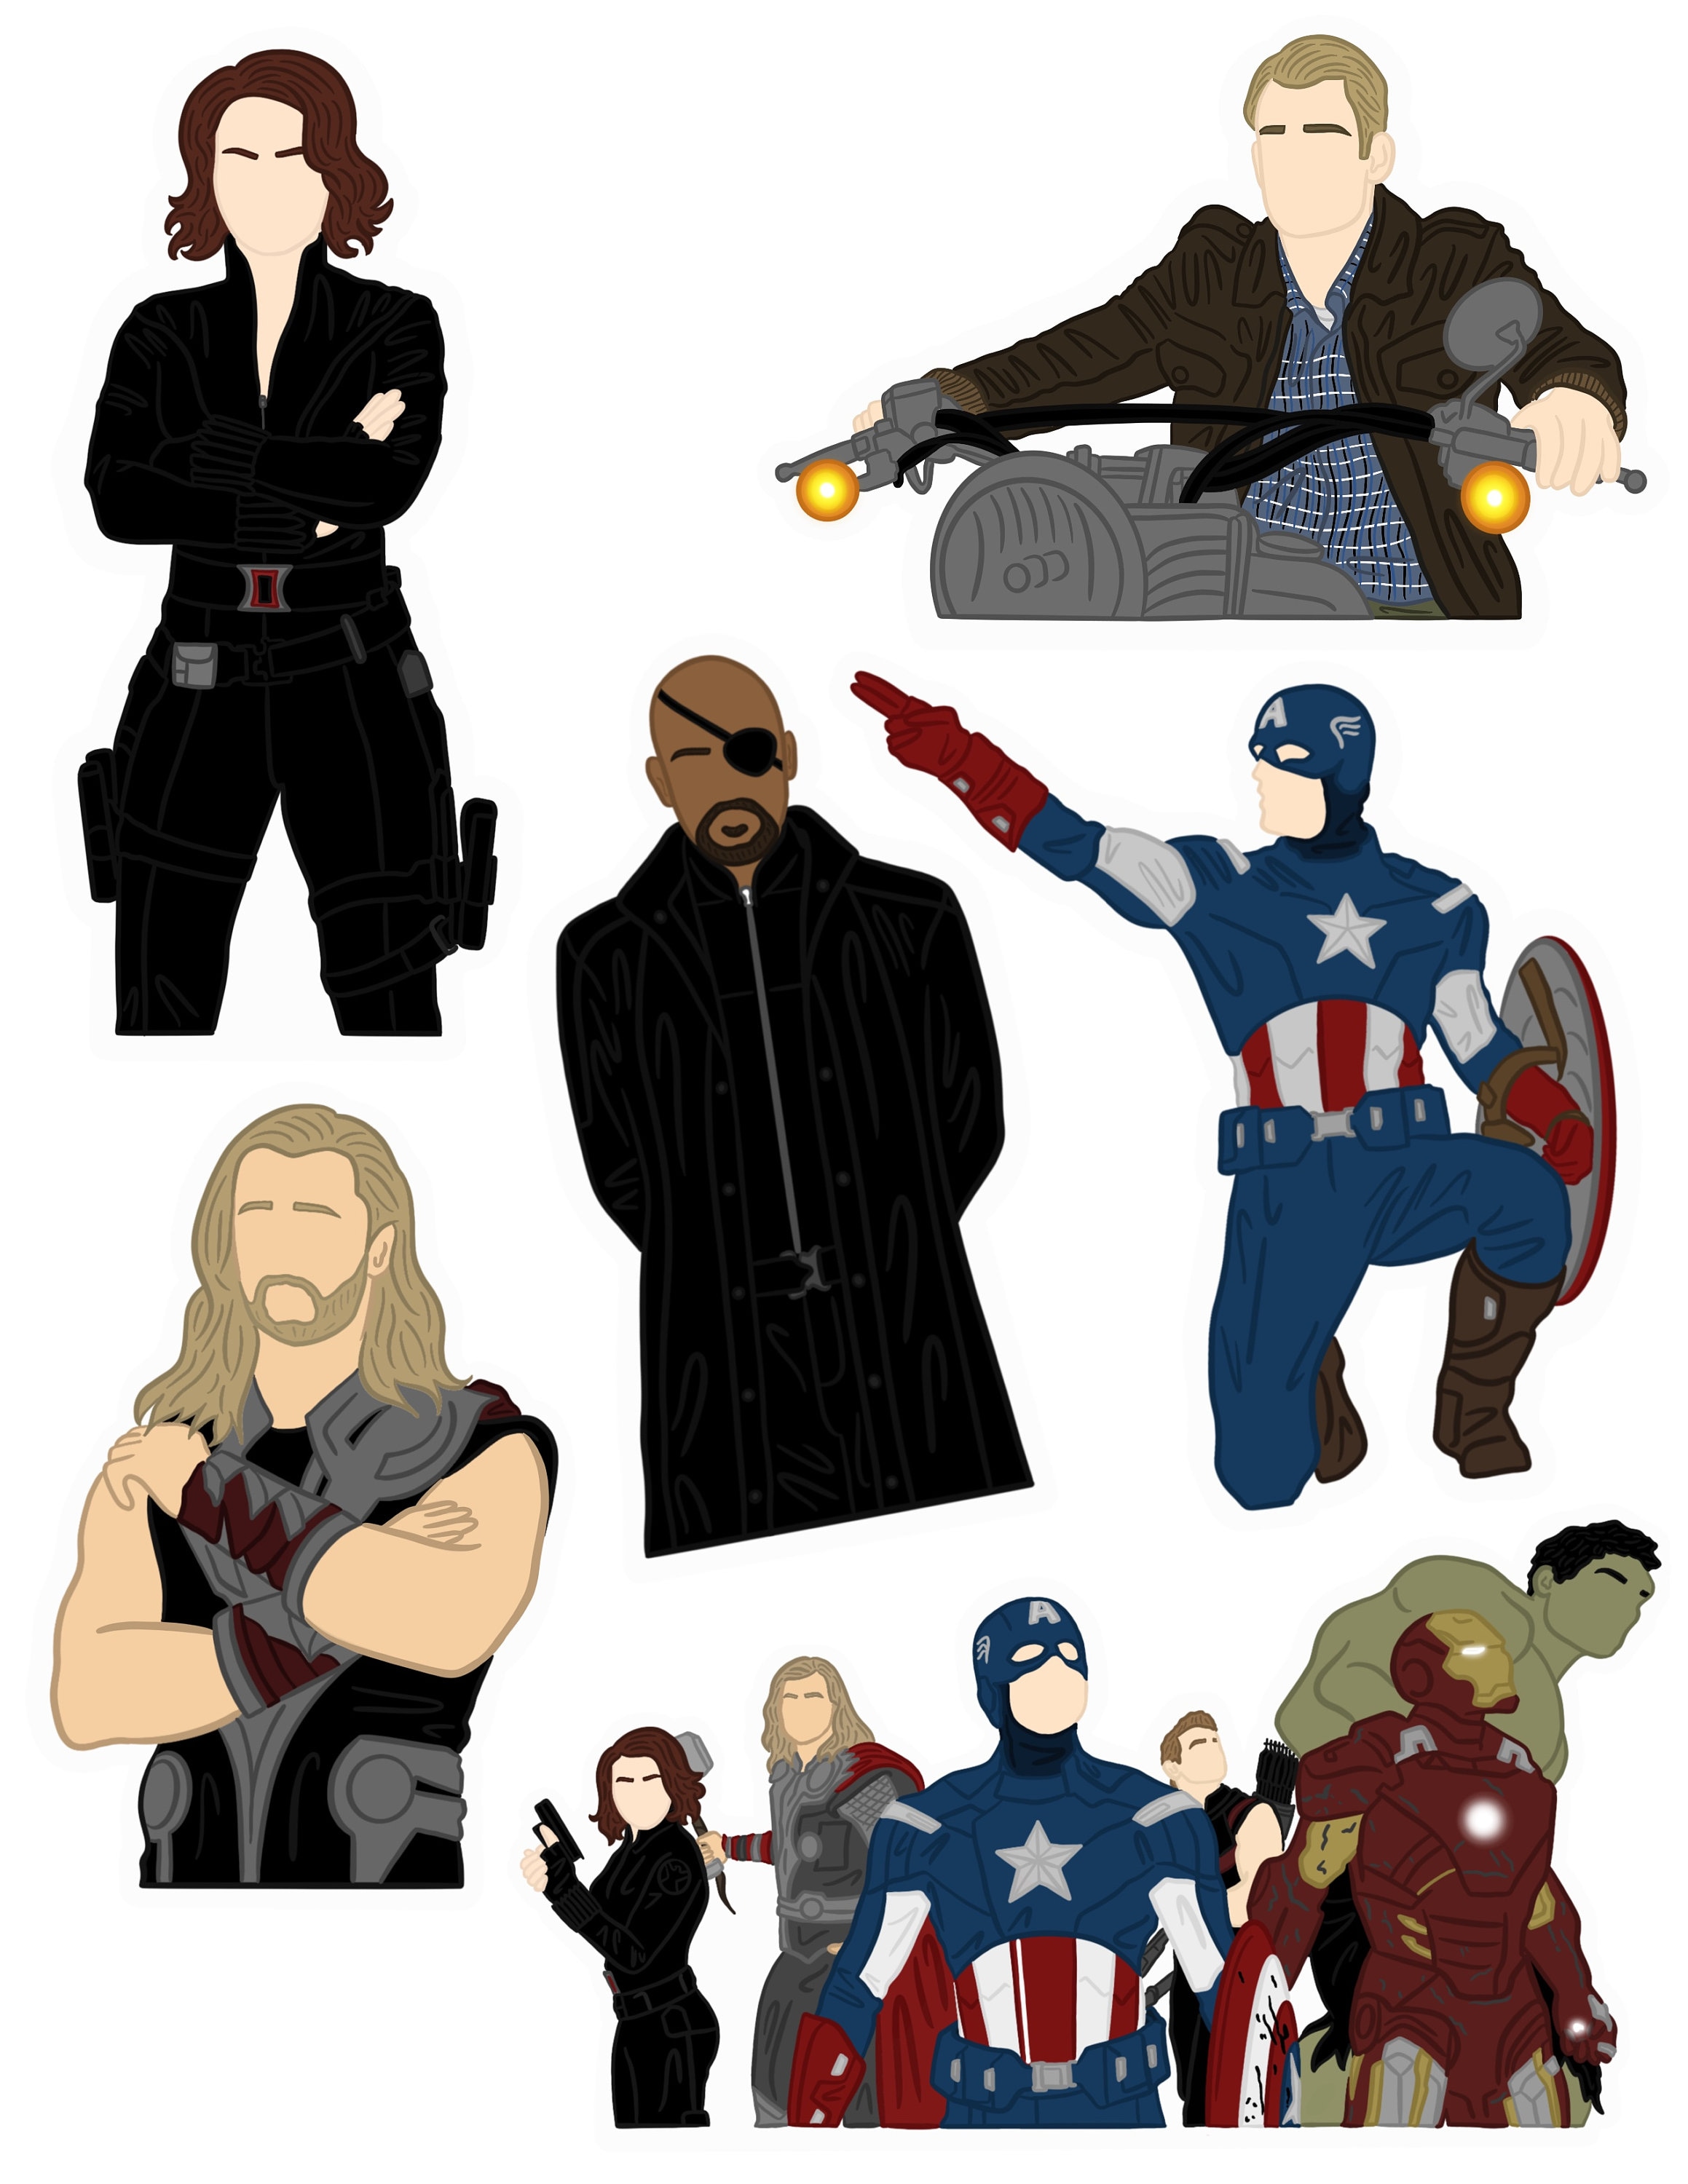 120 Marvel Avengers Stickers Party Favors Teacher Supply (6 sheets) Super  hero